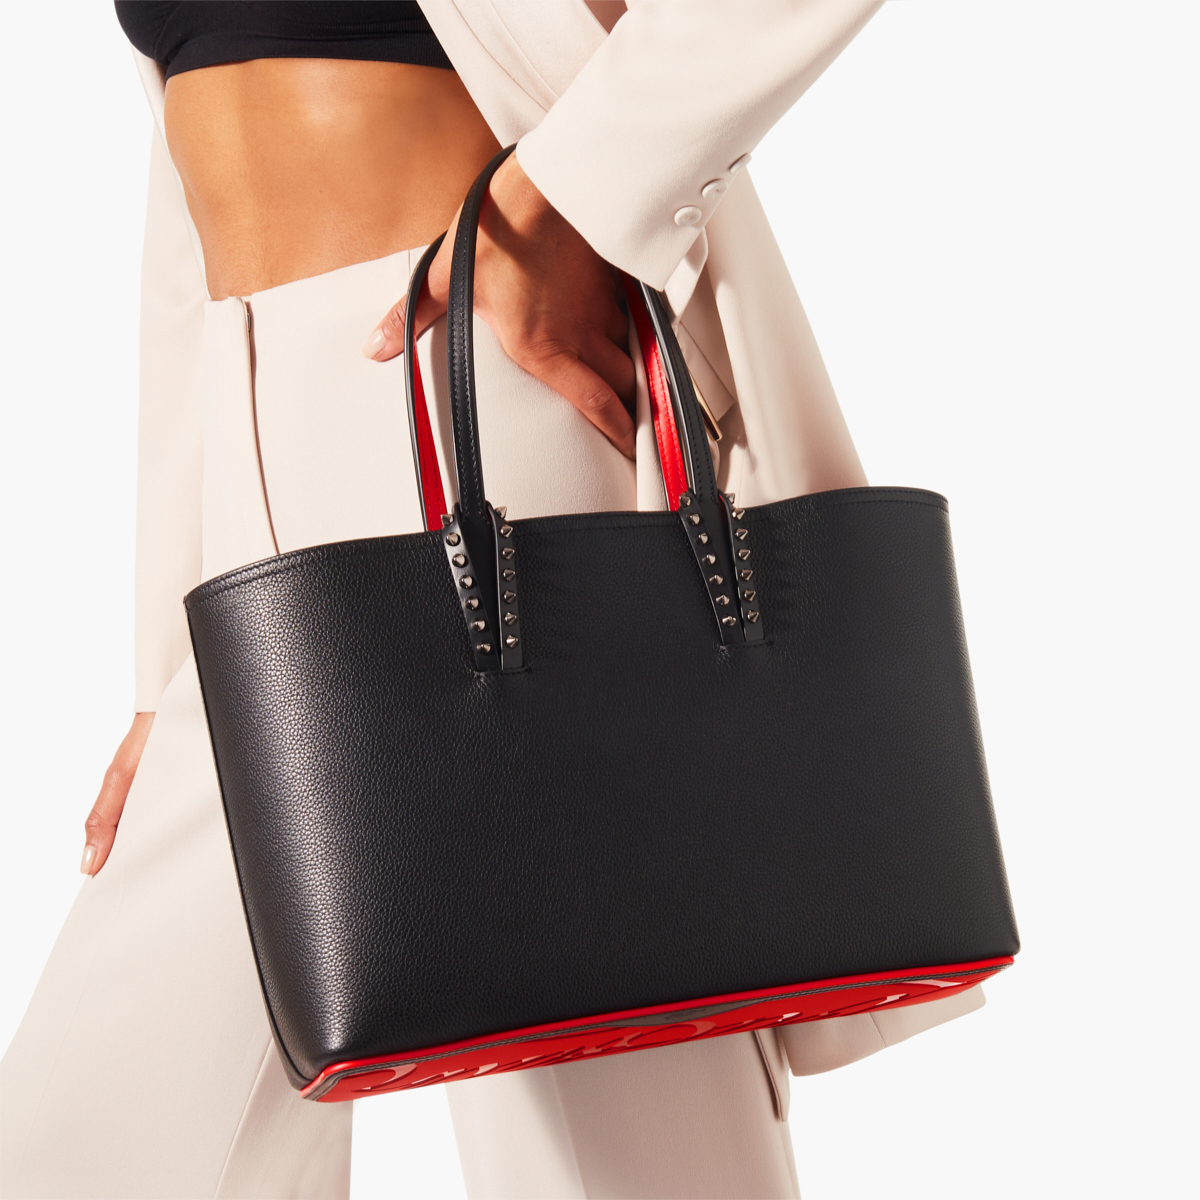 Cabachic Tote Bag by Christian Louboutin. – Boyds